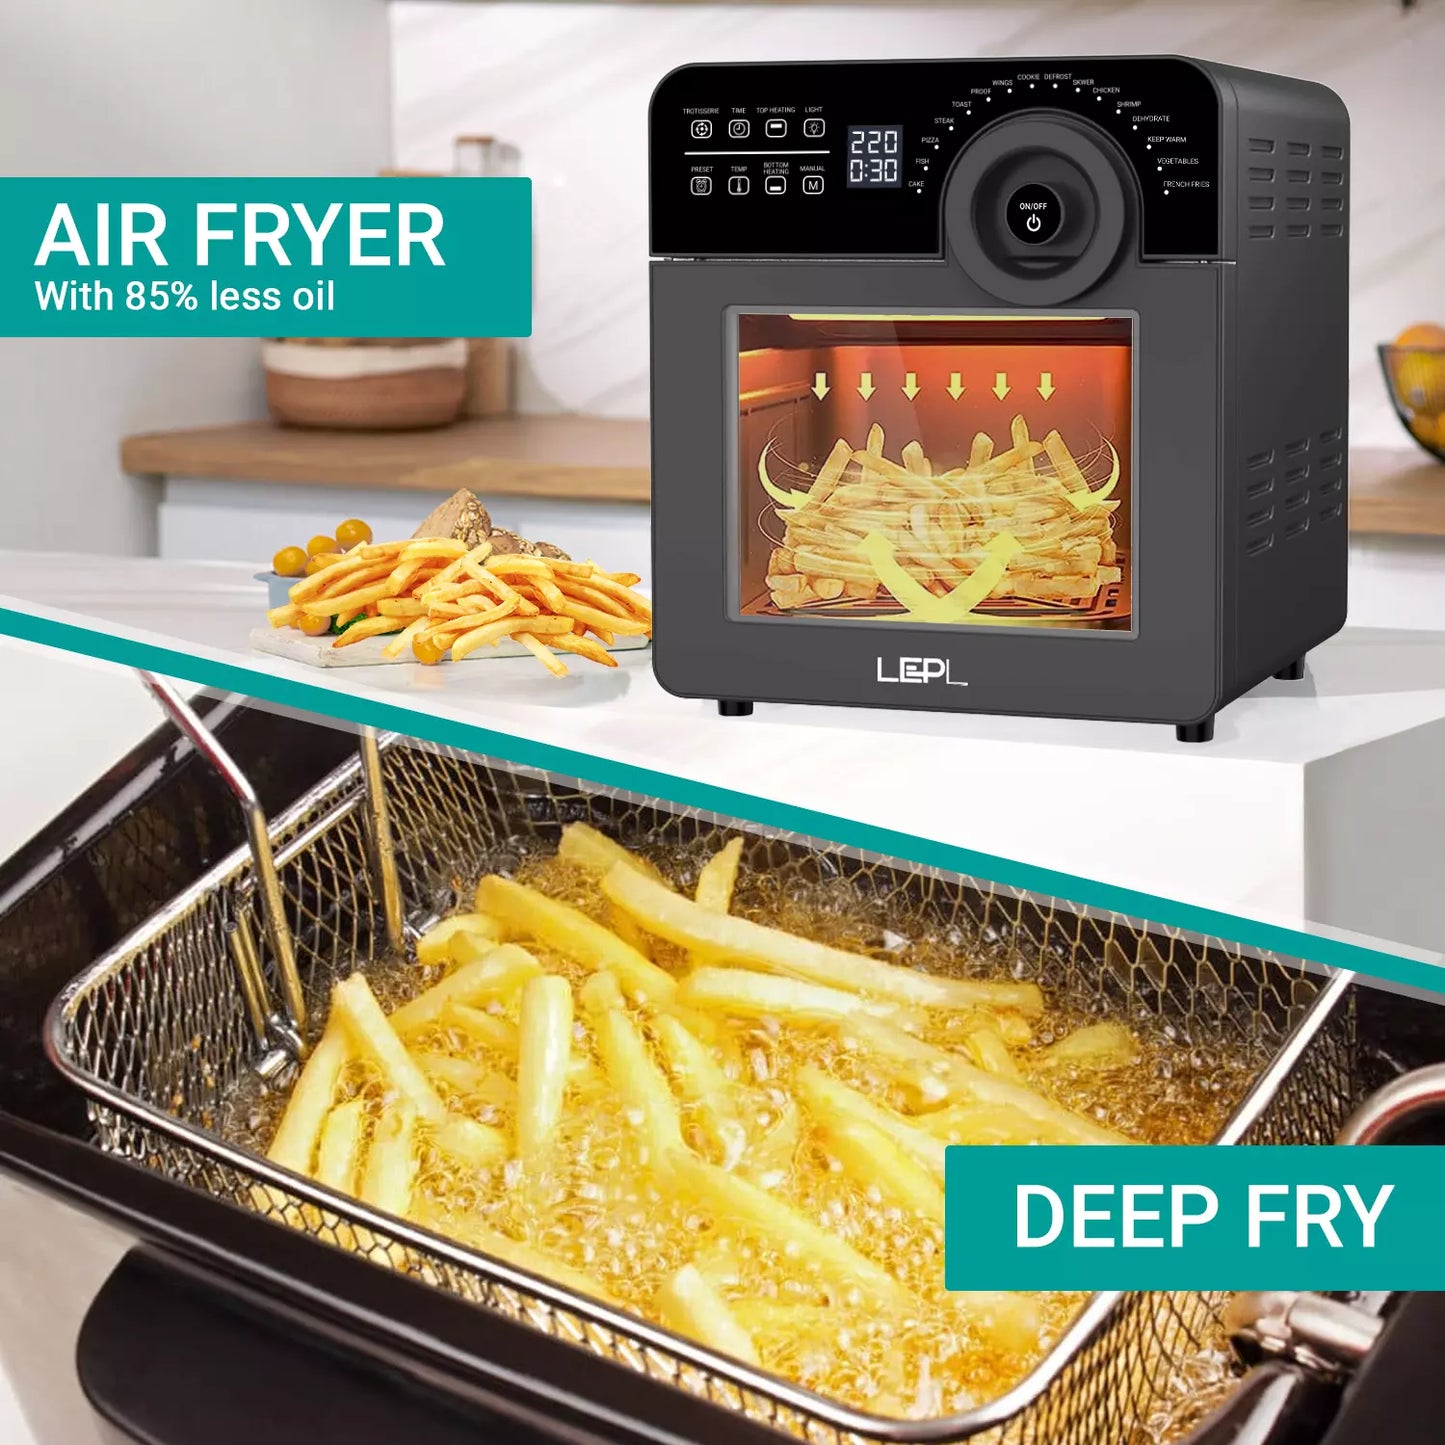 LEPL LAF526 Crispify Air Fryer Oven 14 L,1700 W, 16 Preset Programs| Roast, Dehydrate, Bake,Fry, Rotisserie, Grill, Convection | Touch, Digital display, Rapid Air Tech, Temp &Timer Control,1 Year Warranty